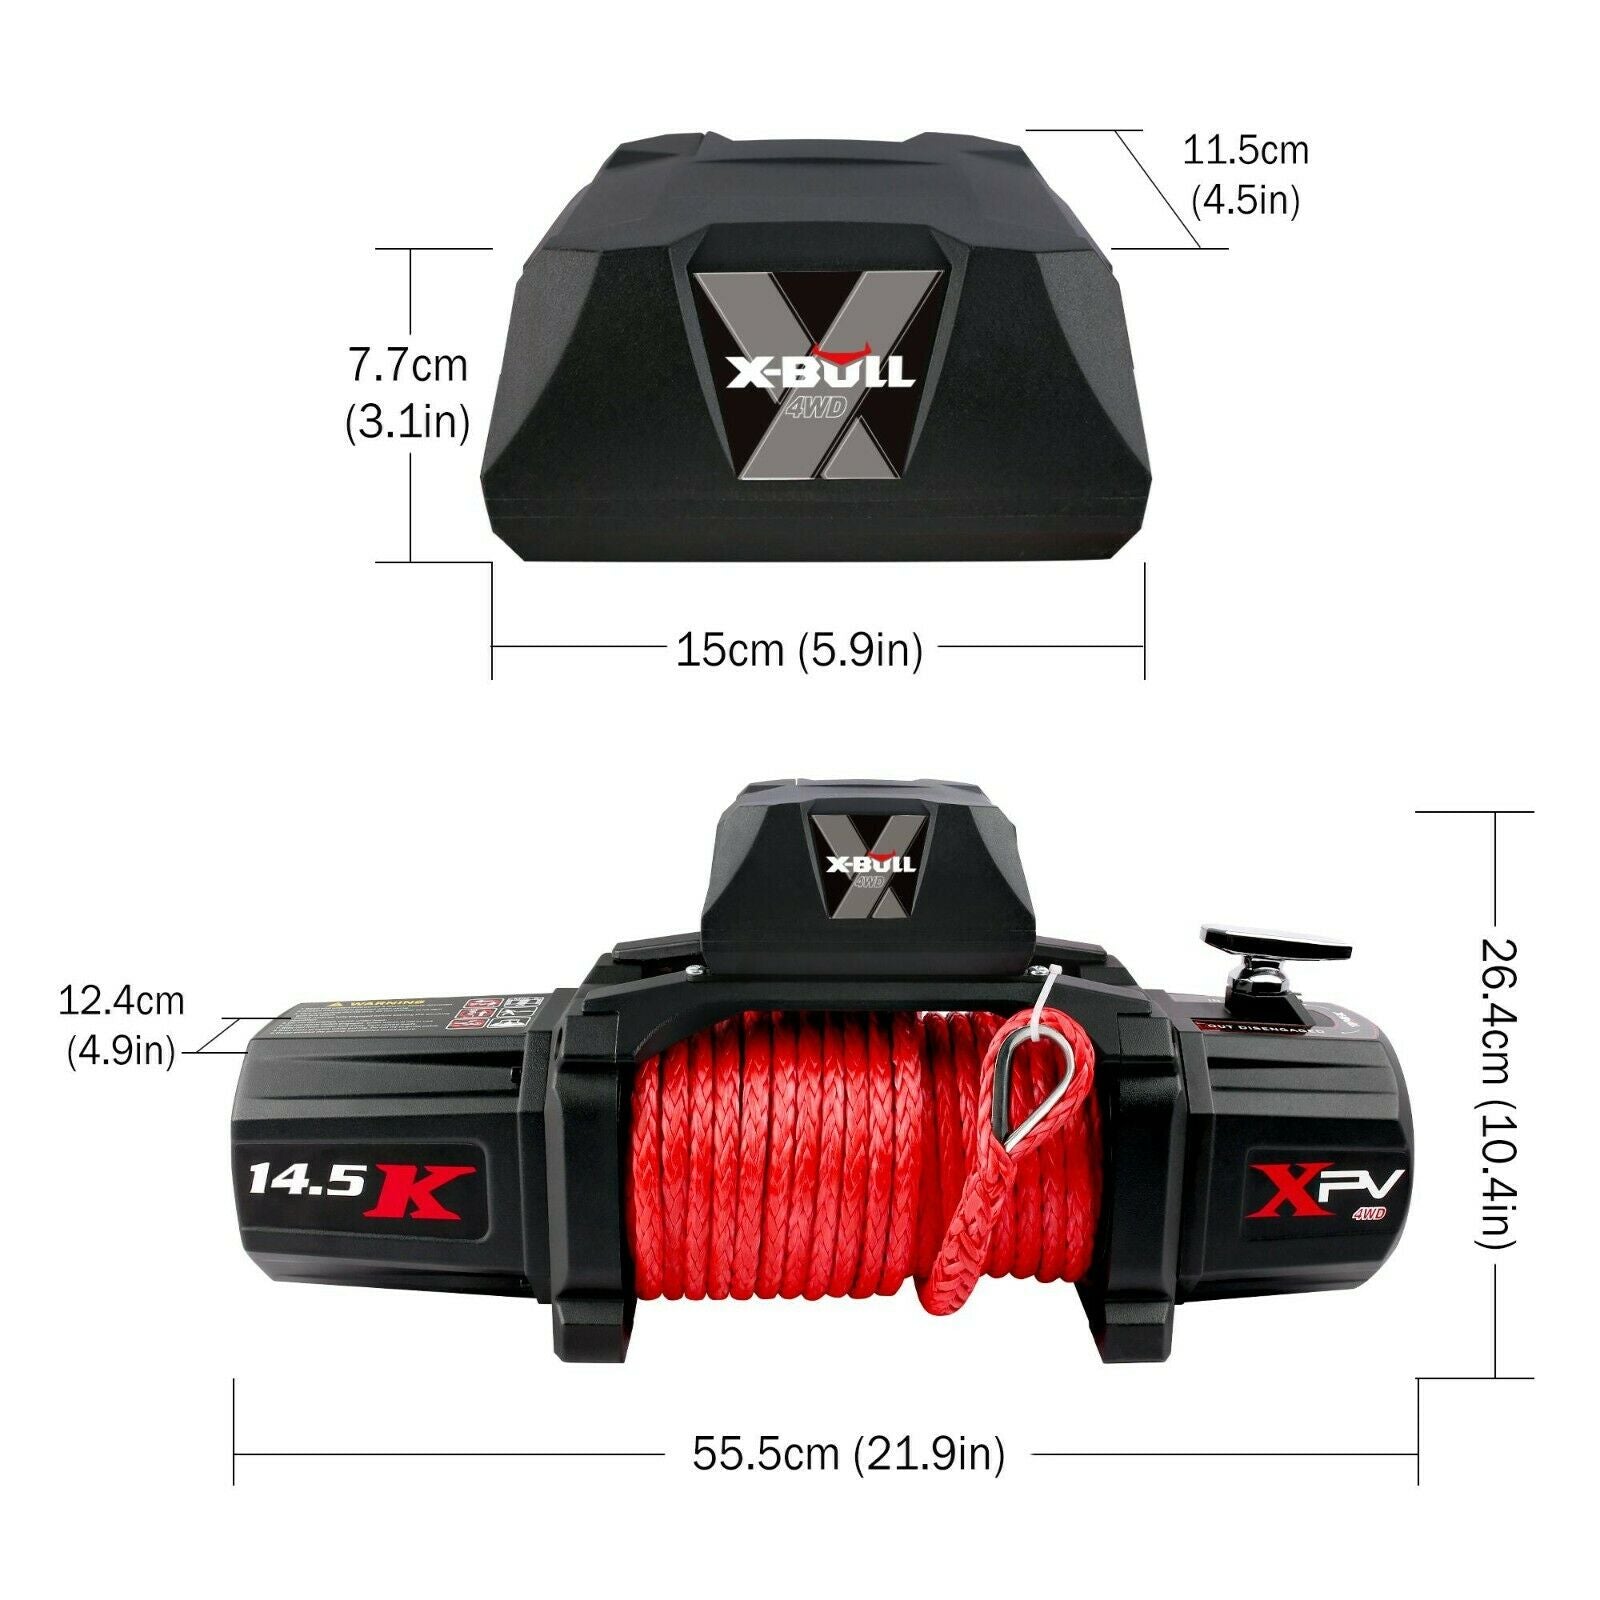 Wireless 12V Synthetic Rope Electric Winch 14500Lb 4X4 Boat